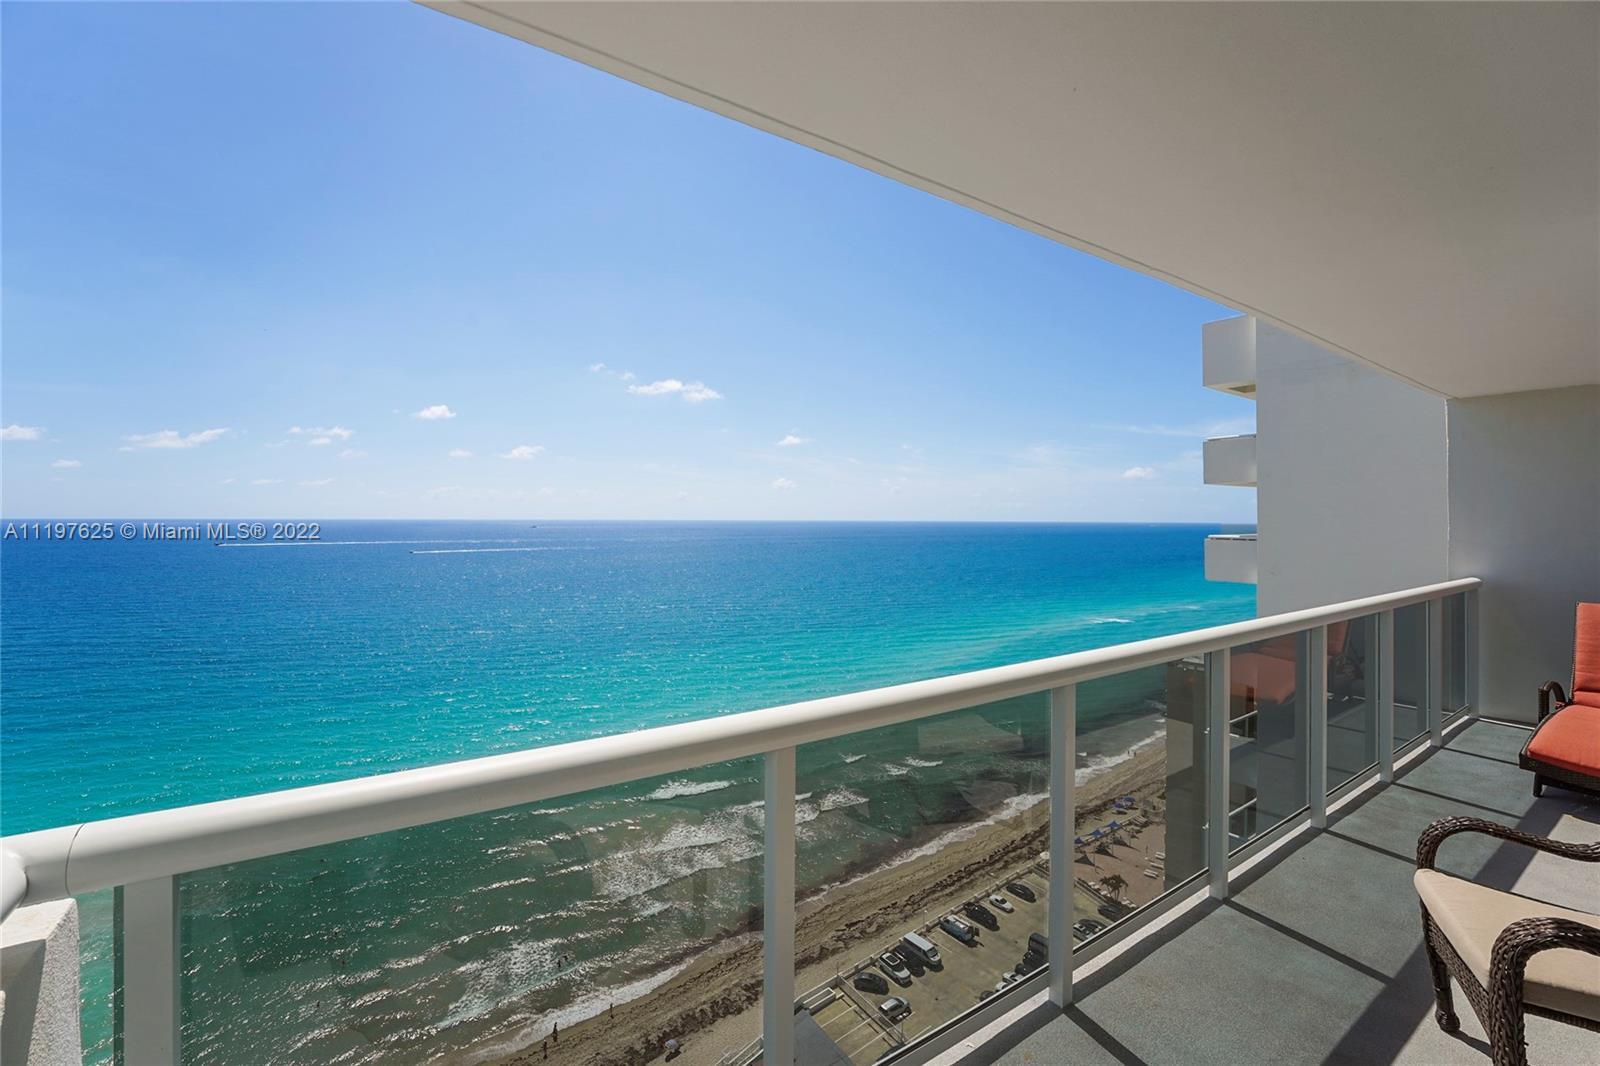 Unobstructed Panoramic Ocean Views that never end! Rare opportunity to own the best line in the icon